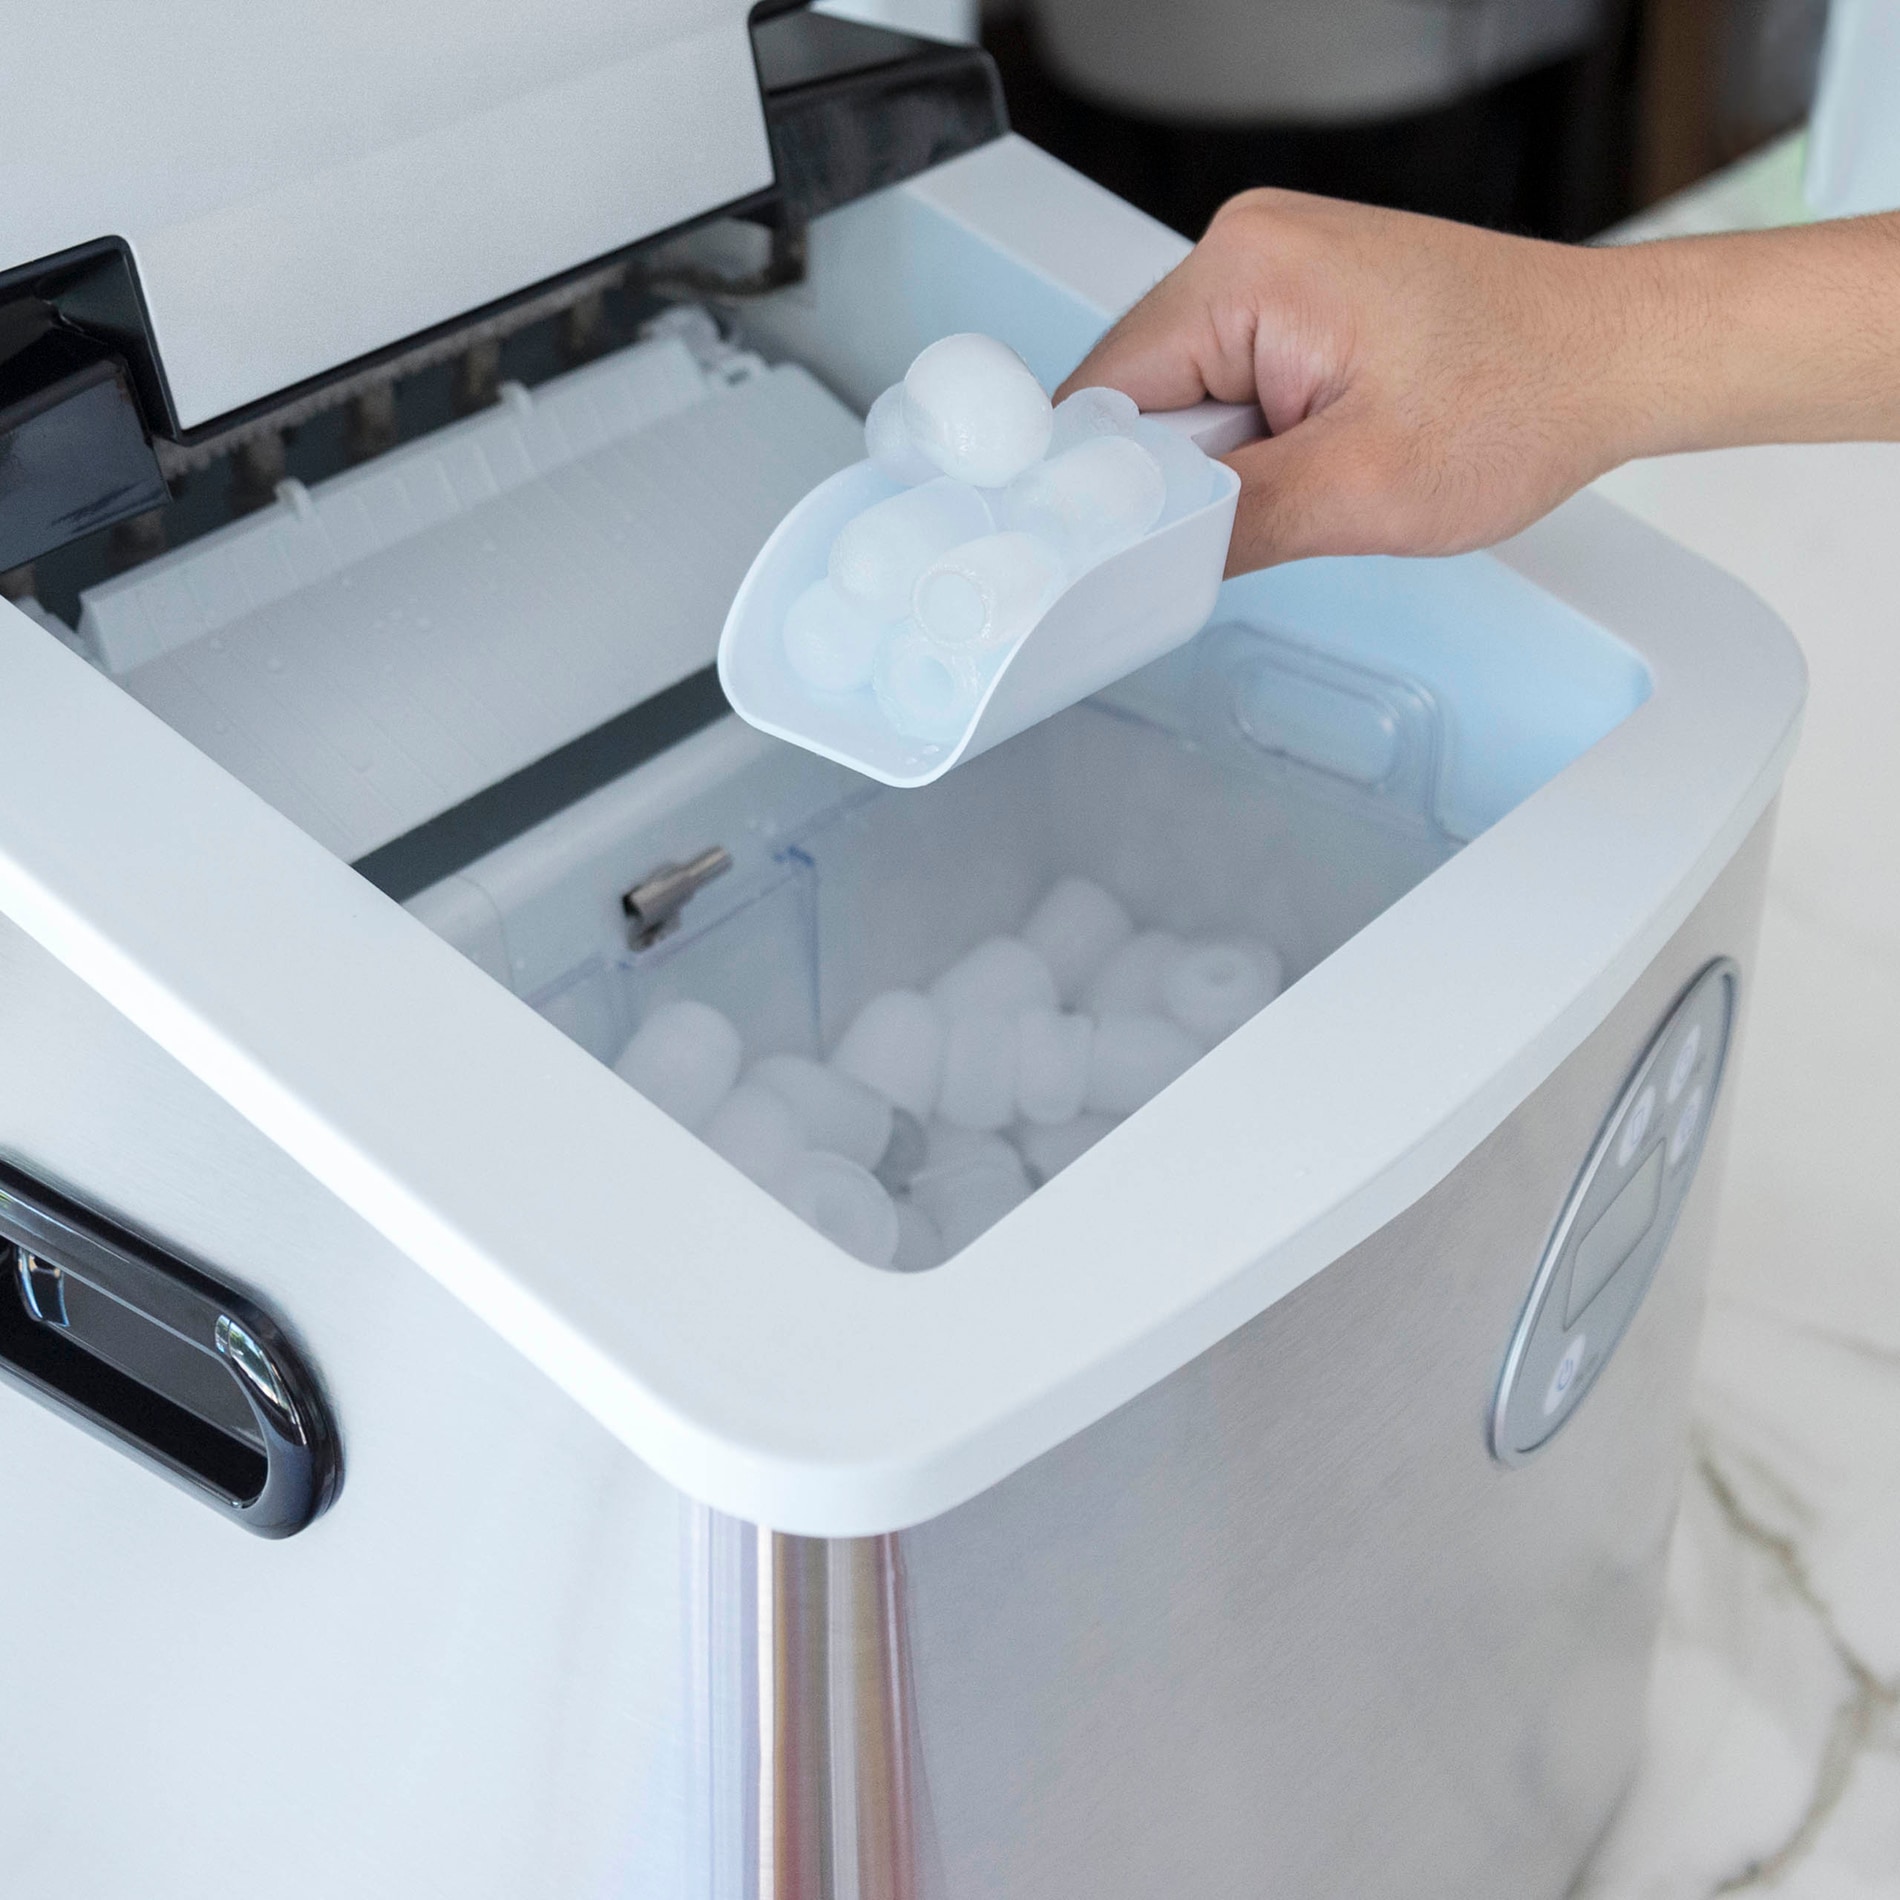 NewAir 28lbs Portable Ice Maker - Stainless Steel